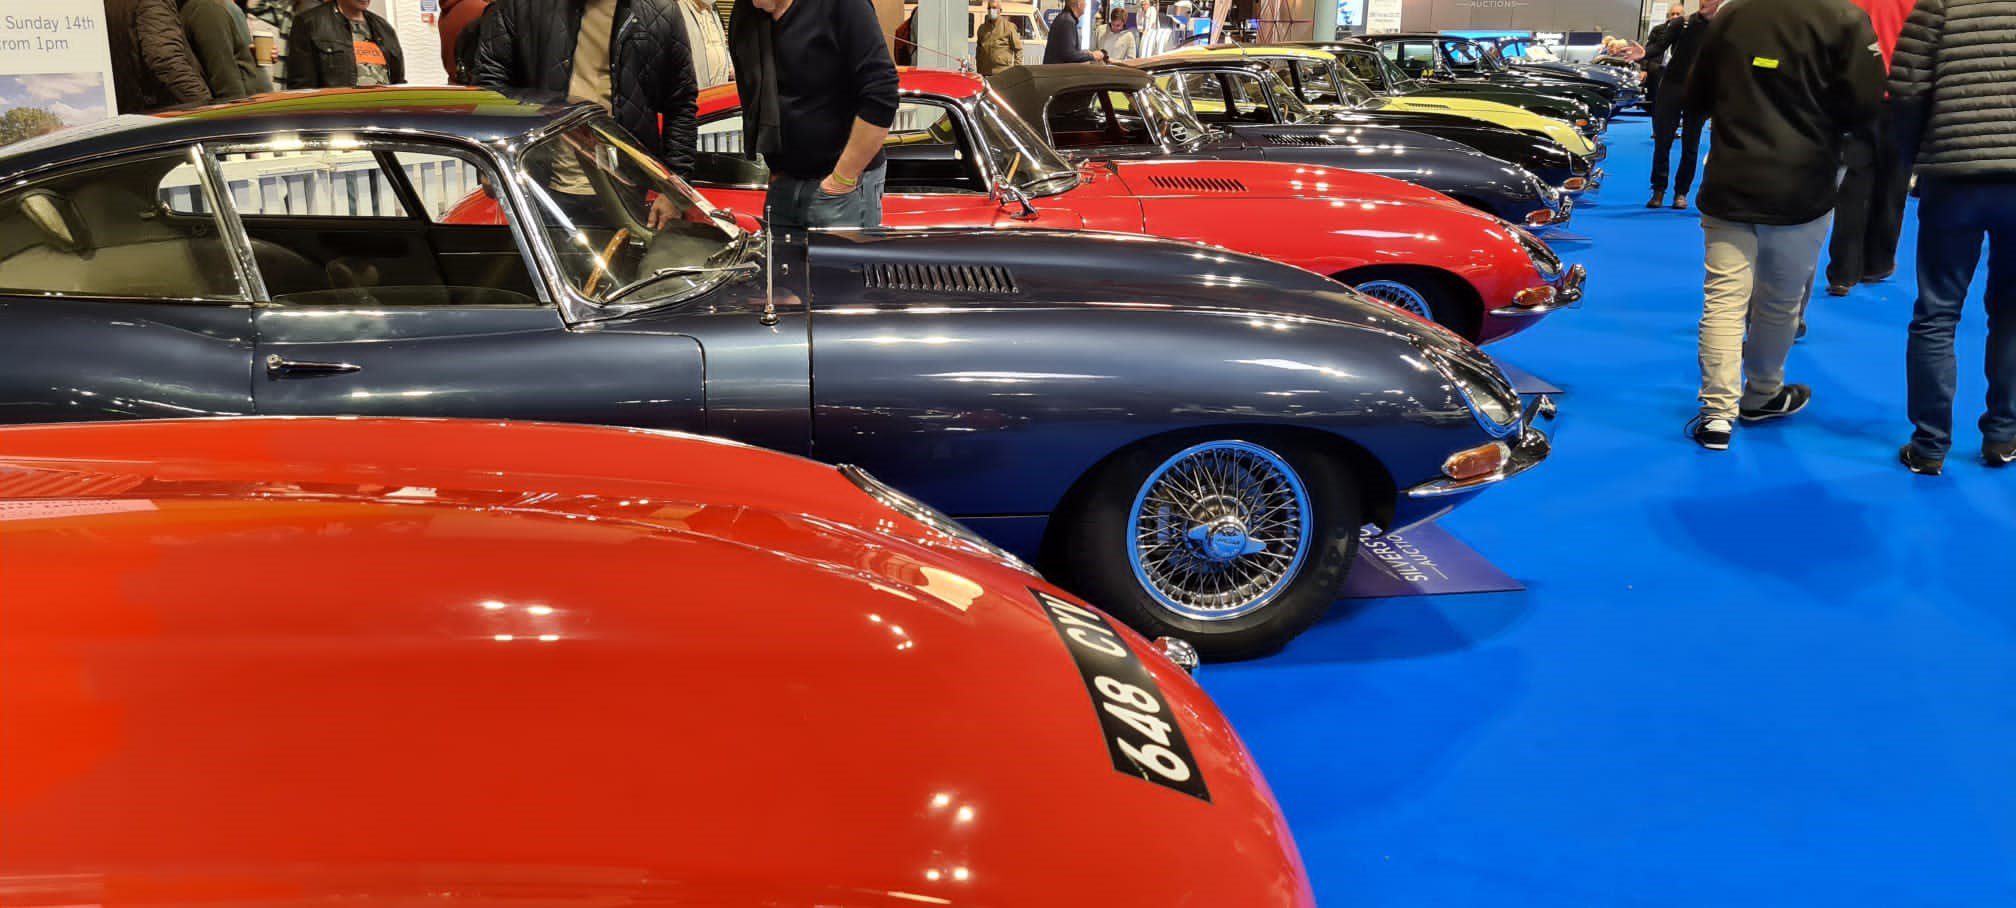 The Best UK Car Shows and Motoring Events in 2022 Oracle Finance